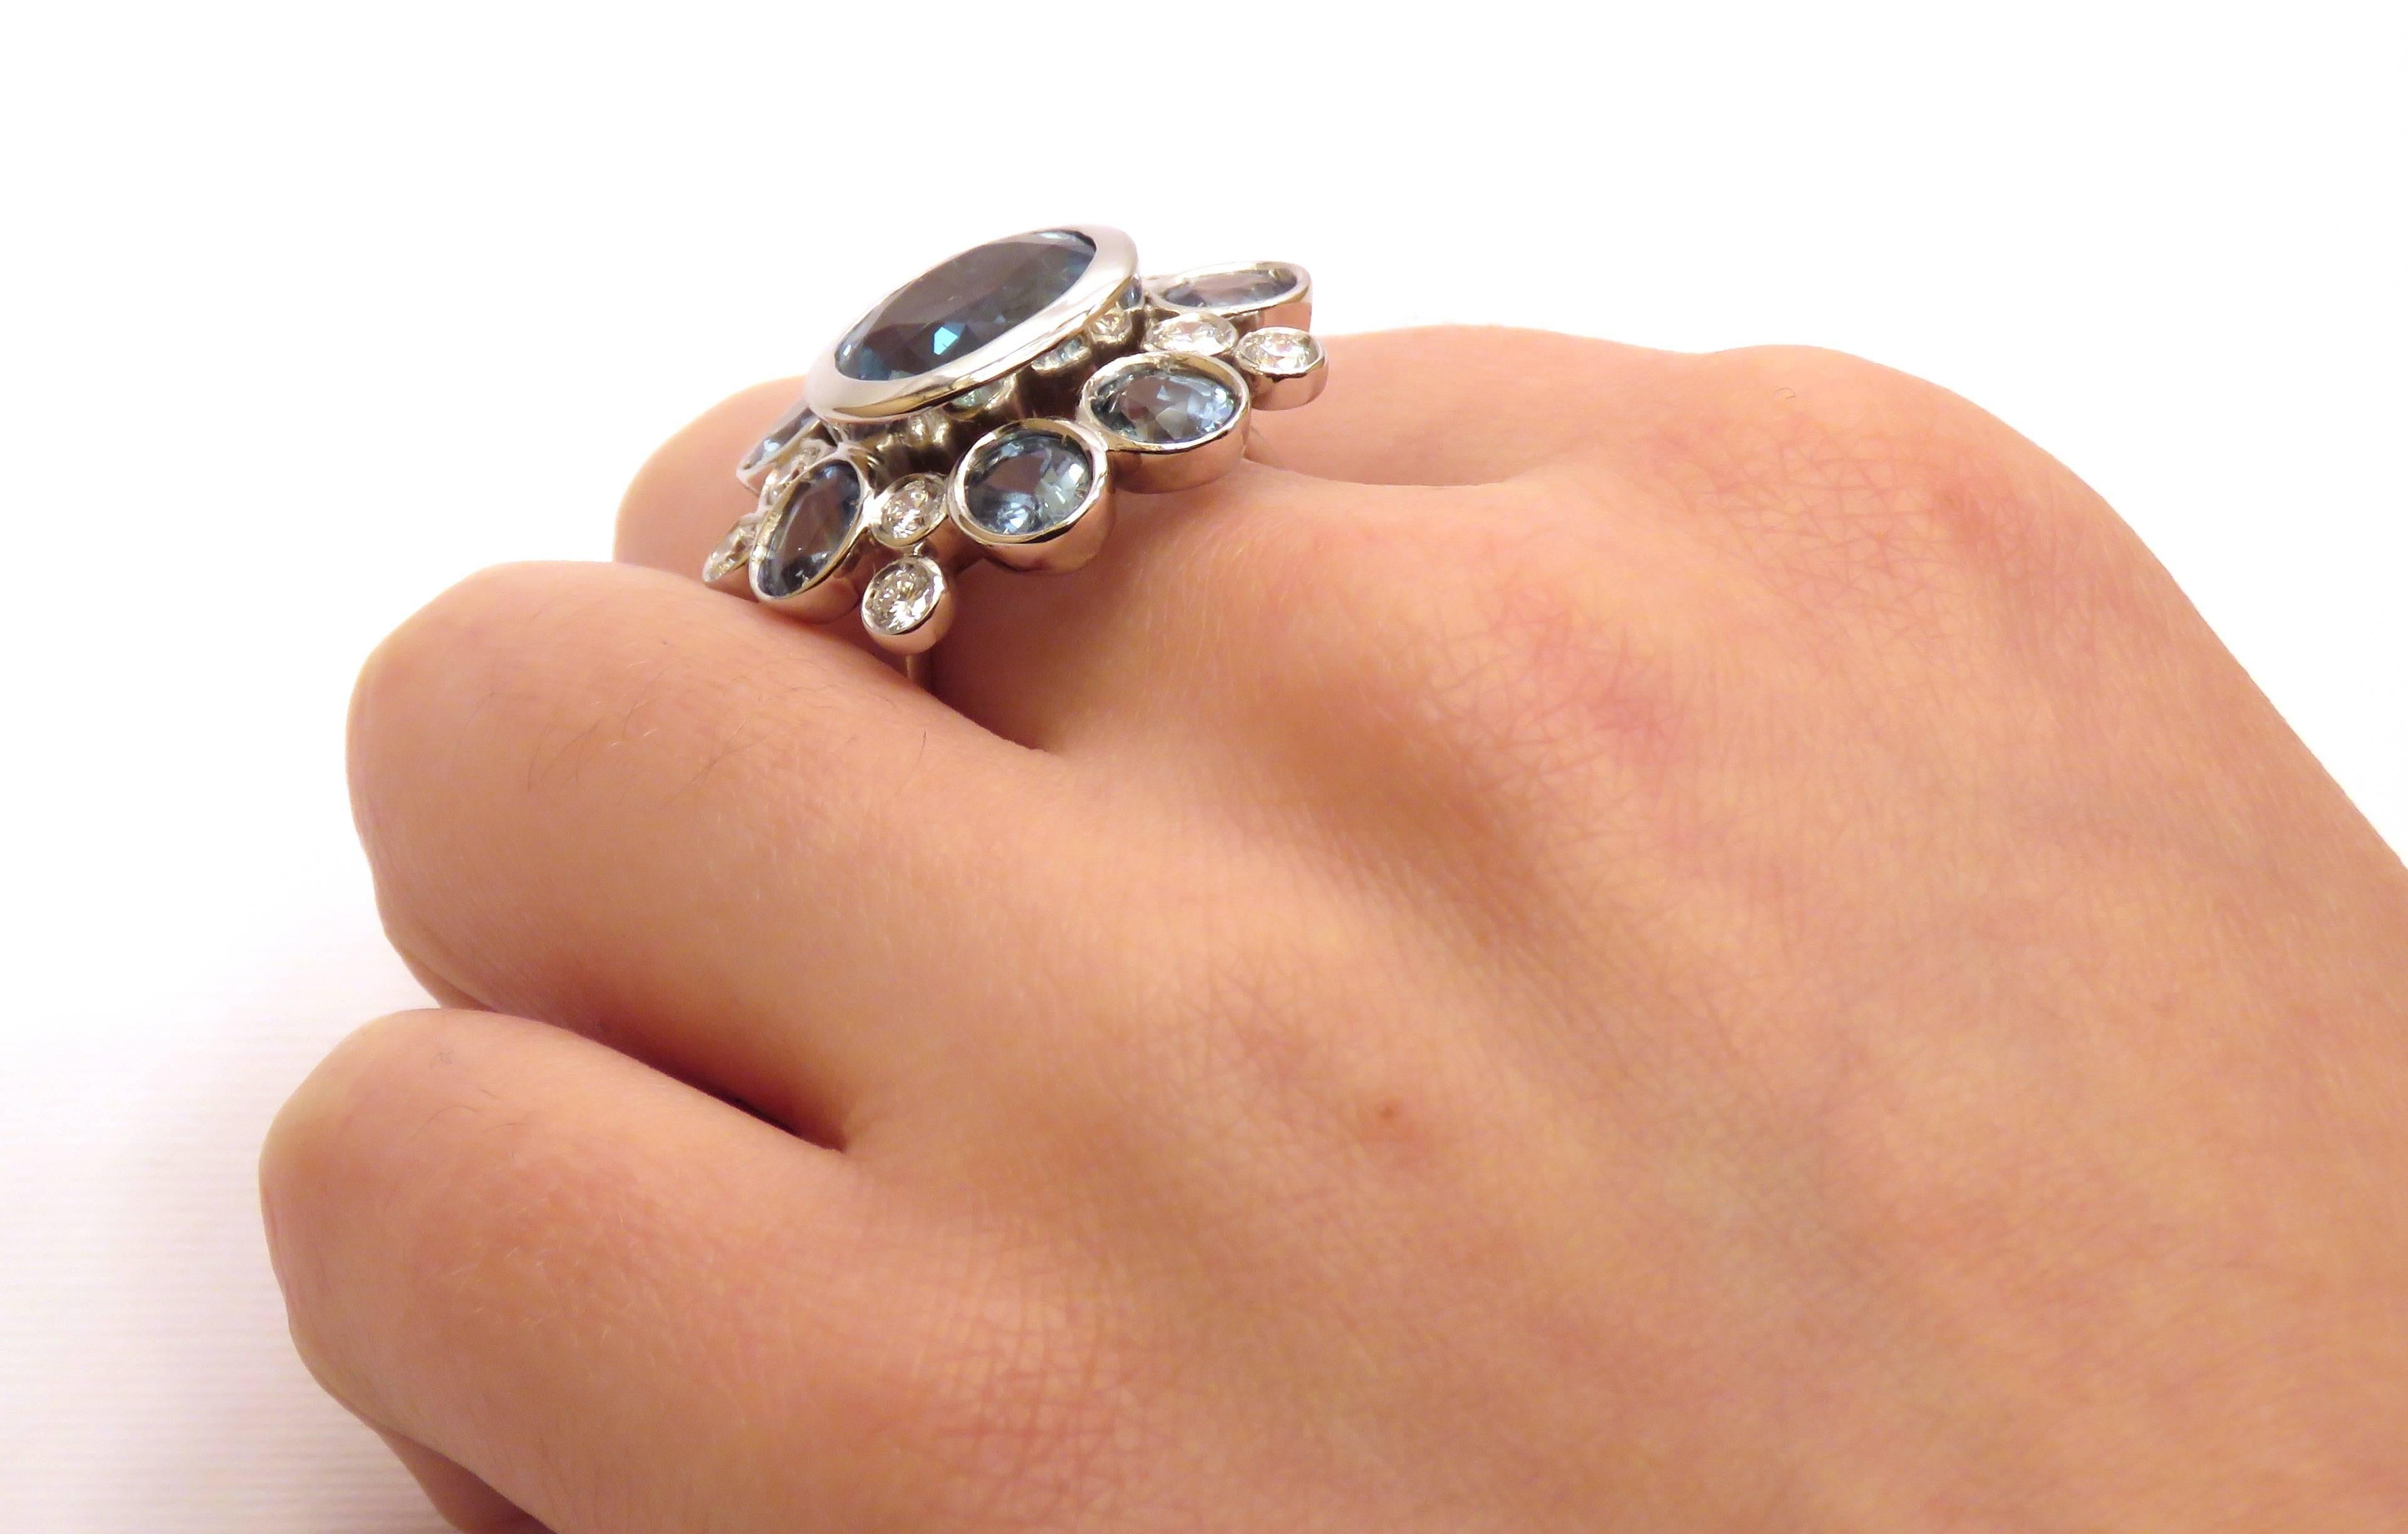 Brilliant Cut Aquamarine Sapphires Diamonds White Gold Cocktail Ring Handcrafted in Italy